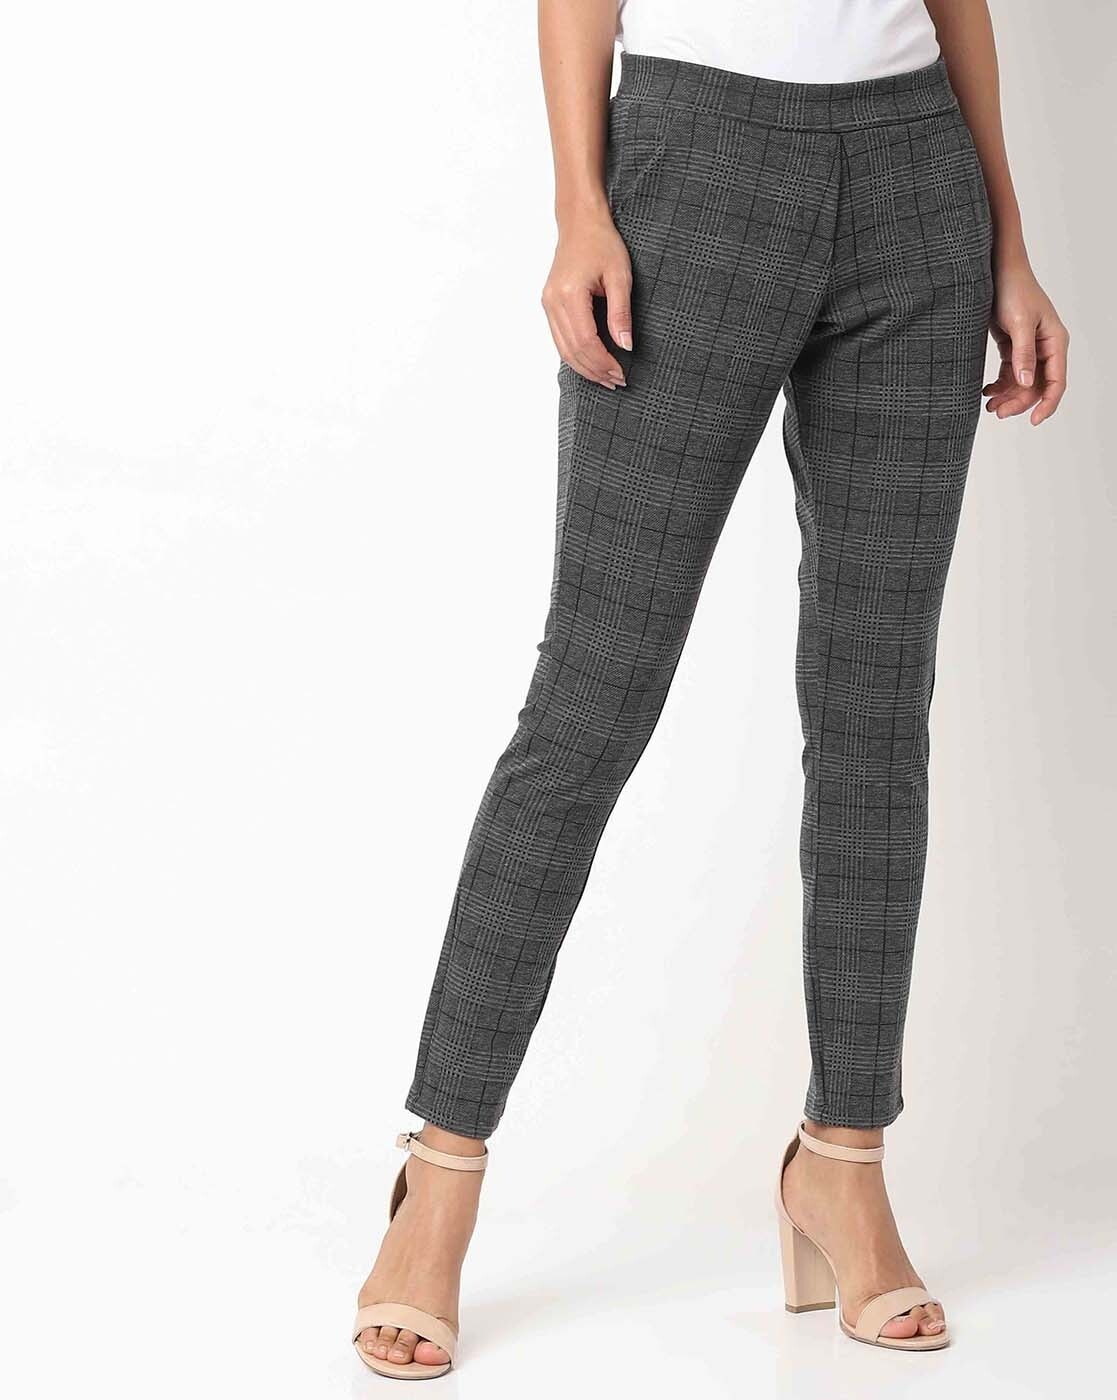 Grey Trousers For Women Online  Buy Grey Trousers Online in India